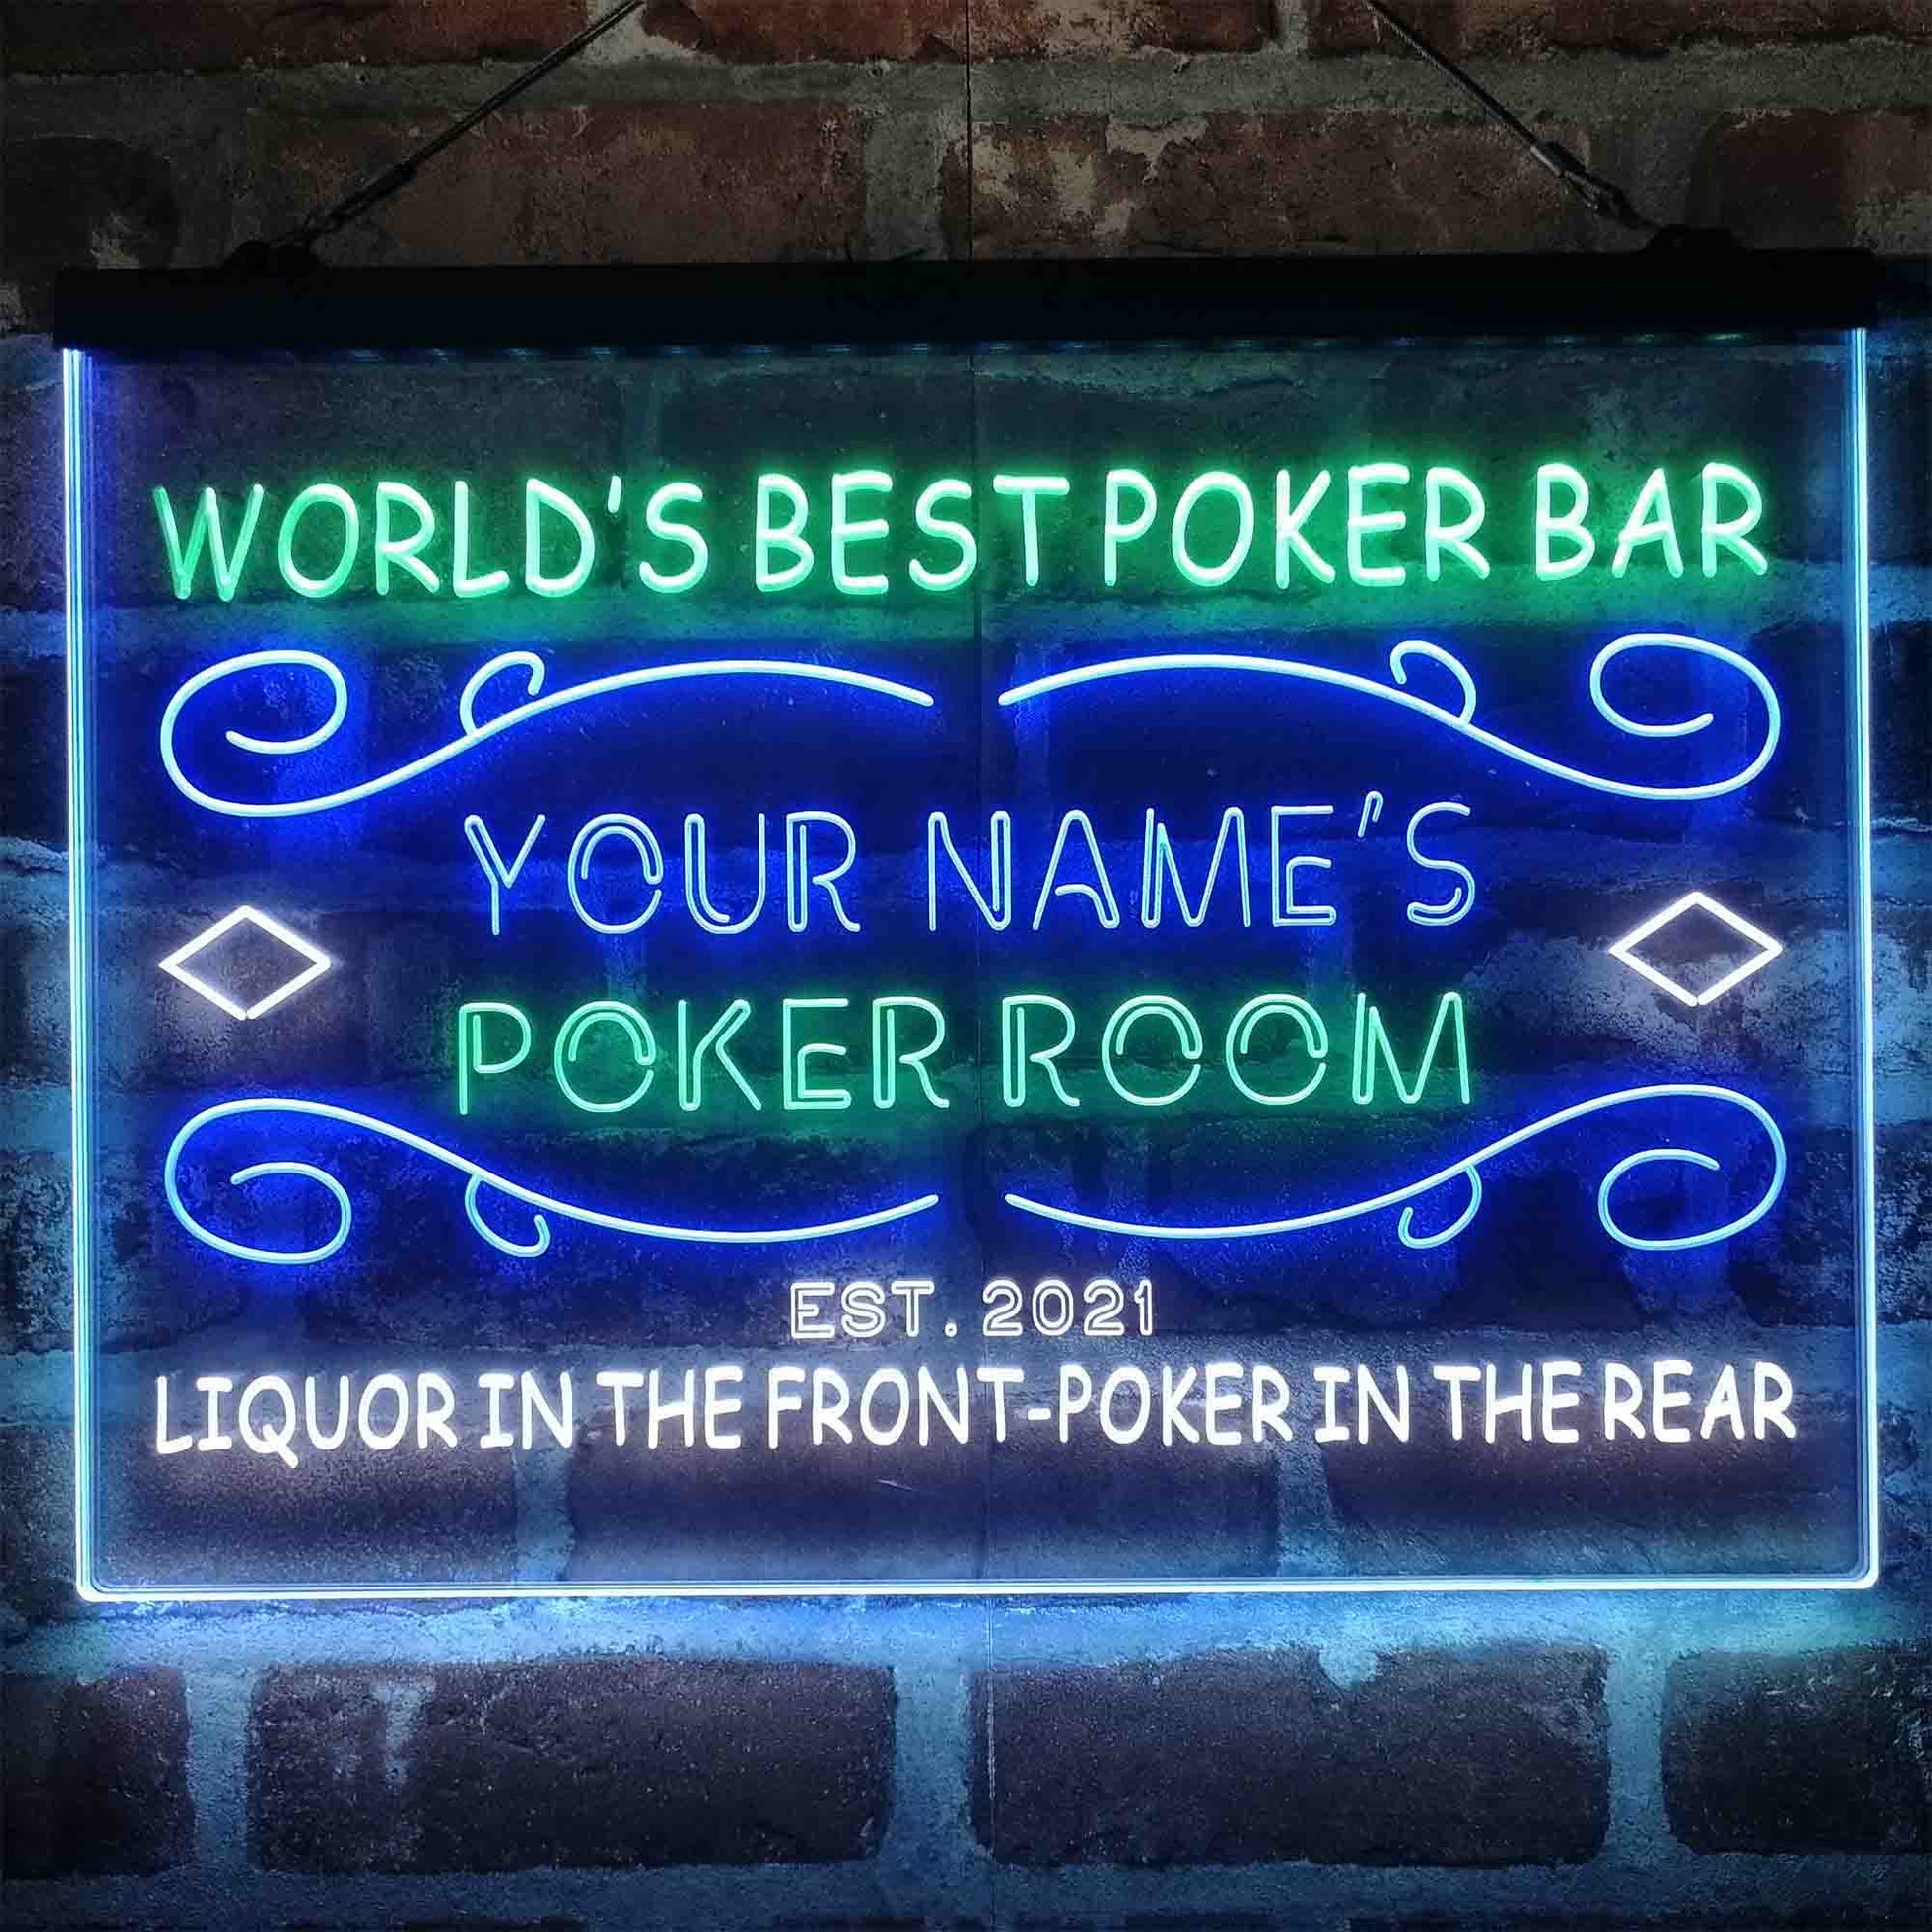 Personalized Poker Room Bar 3-Color LED Neon Light Sign - Way Up Gifts